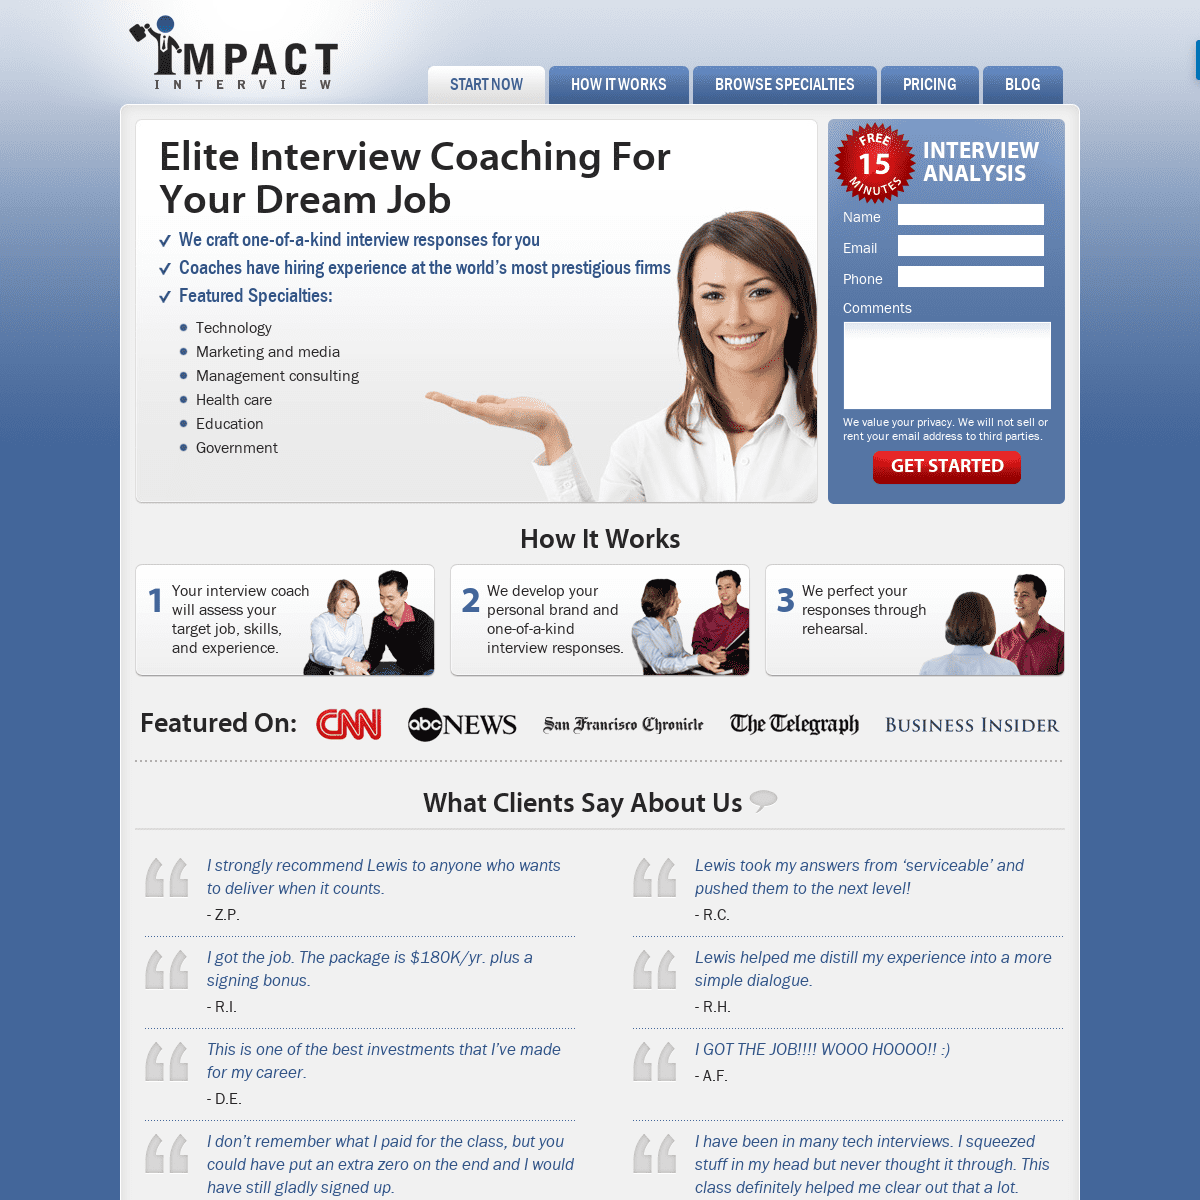 Professional Interview Coach for $100k Jobs